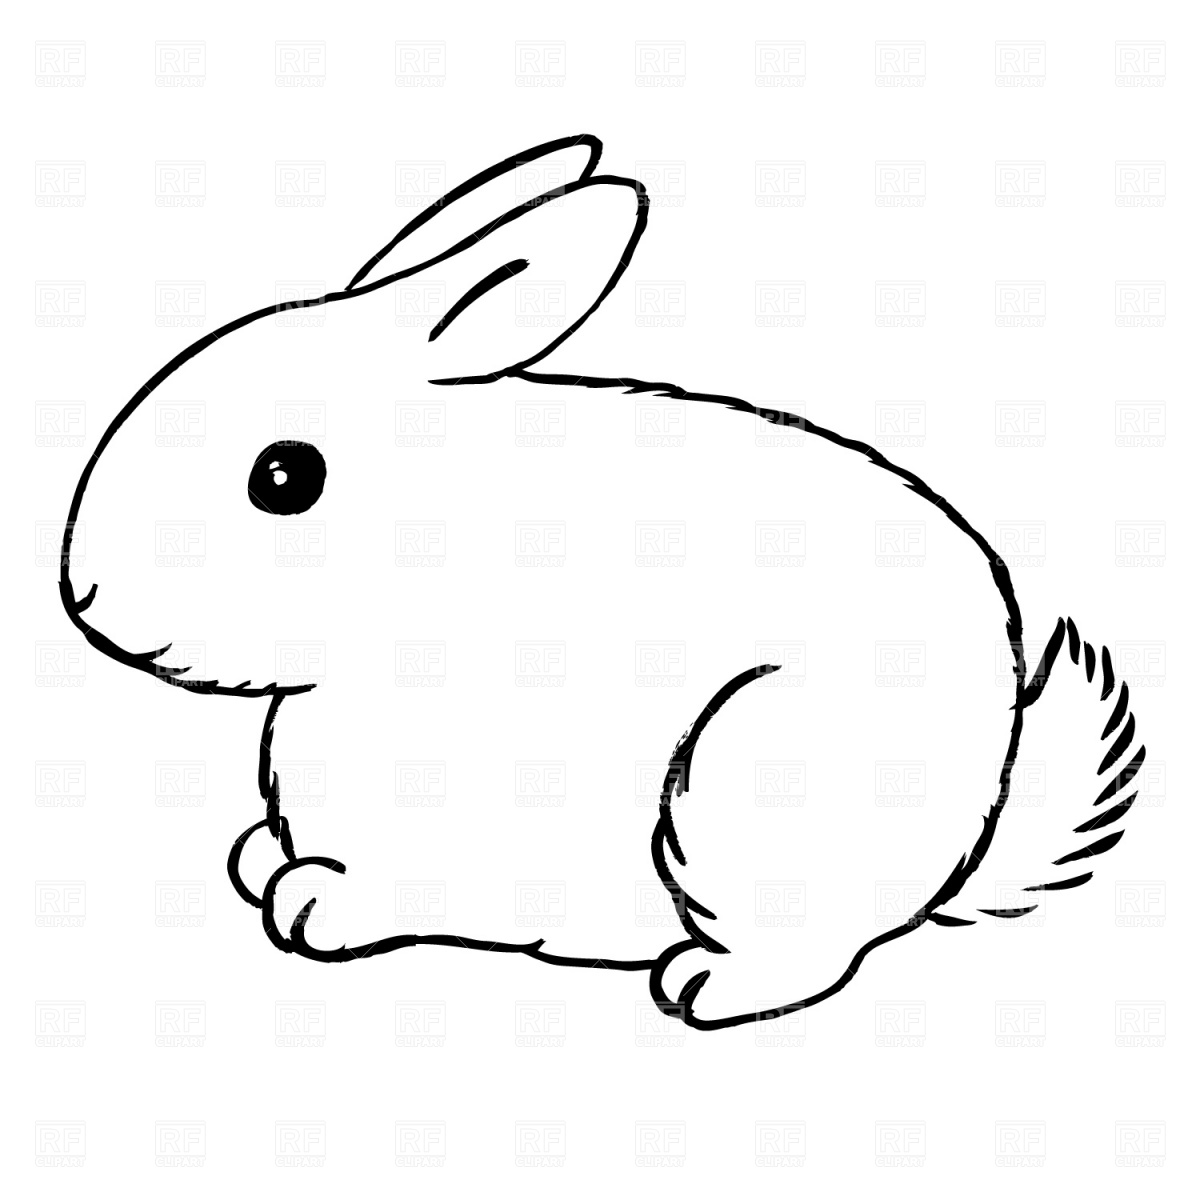 Rabbit bunny clipart black and white free clipart images 5 - Clipartix